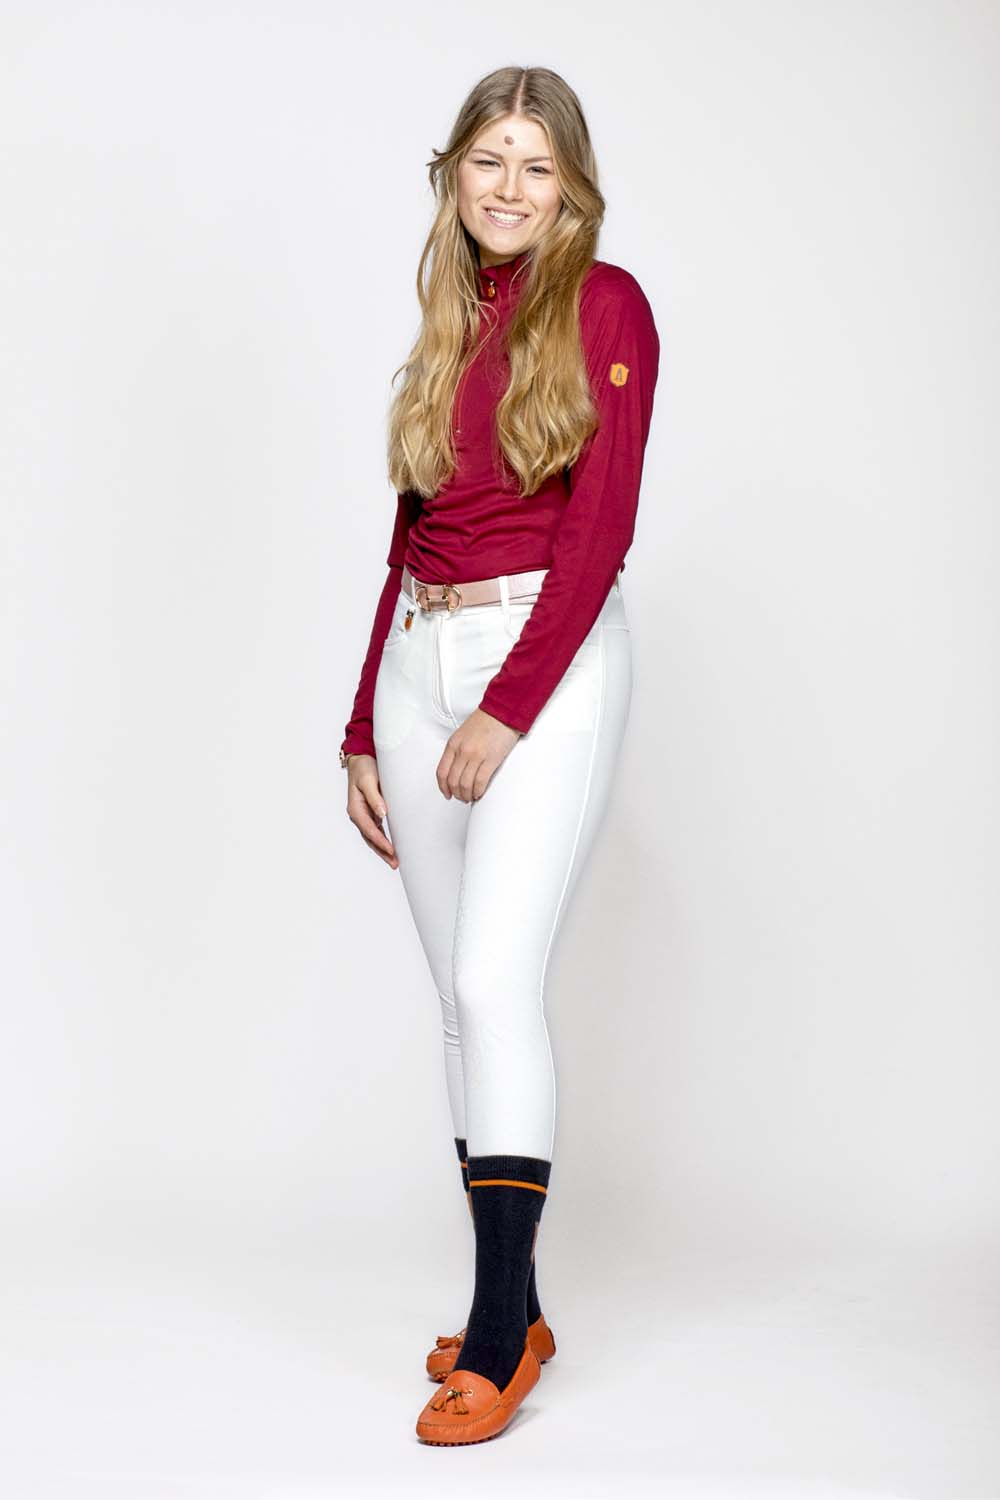 Riding's breeches with silicone print in snaffle pattern